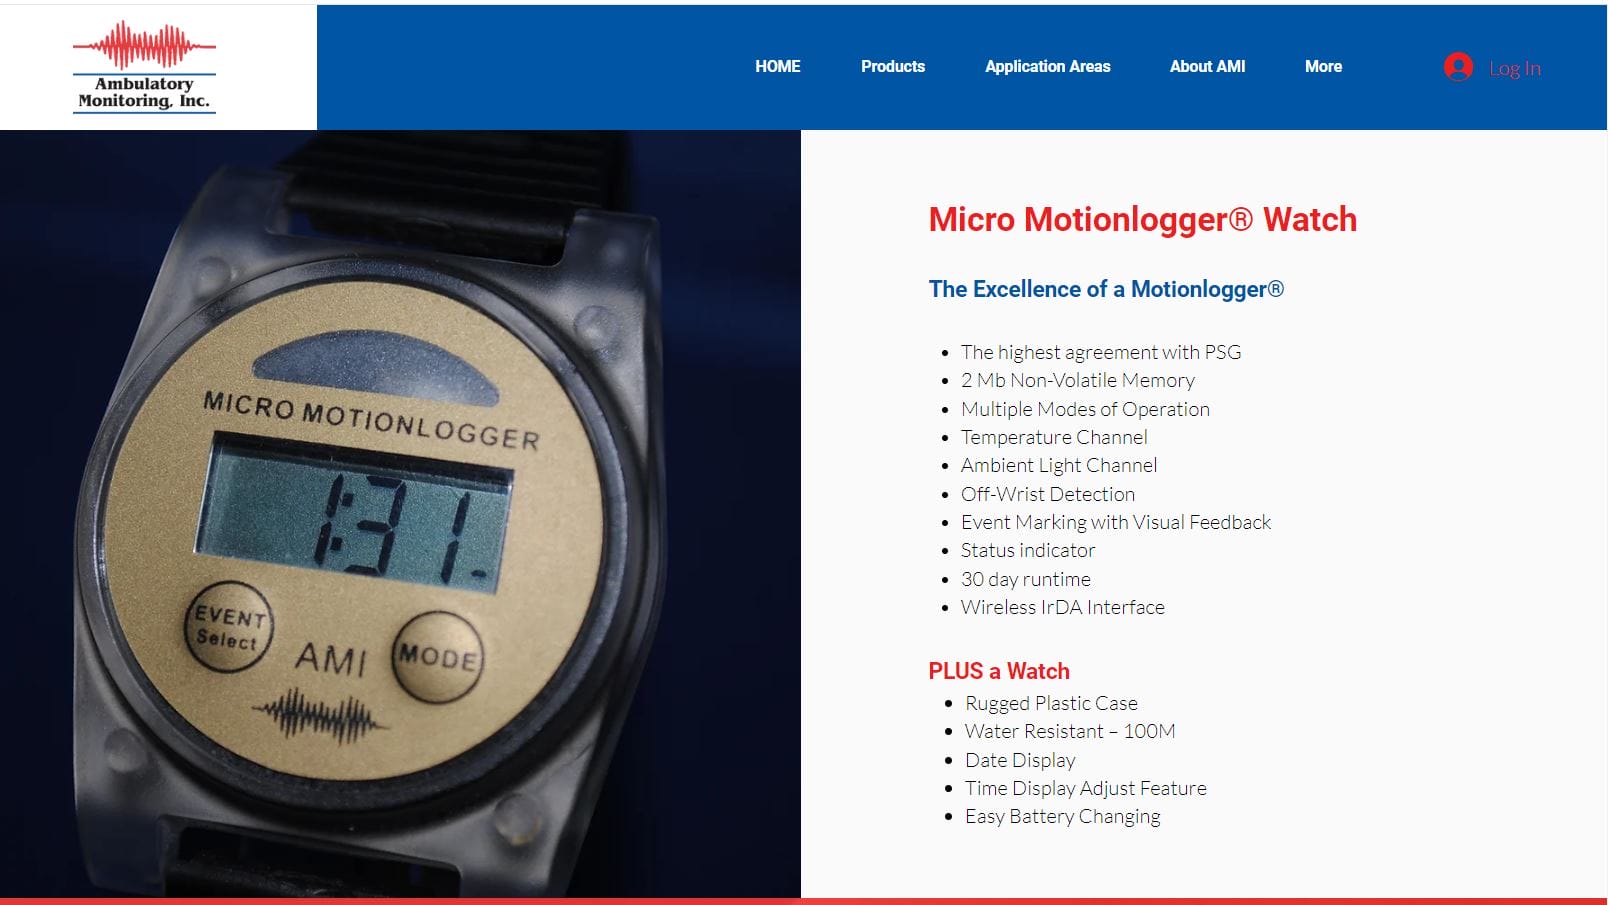 A digital wristwatch with labeled buttons and display, showing "Micro Motionlogger Watch" on its screen, featured on a company's promotional website page along with pricing guide.